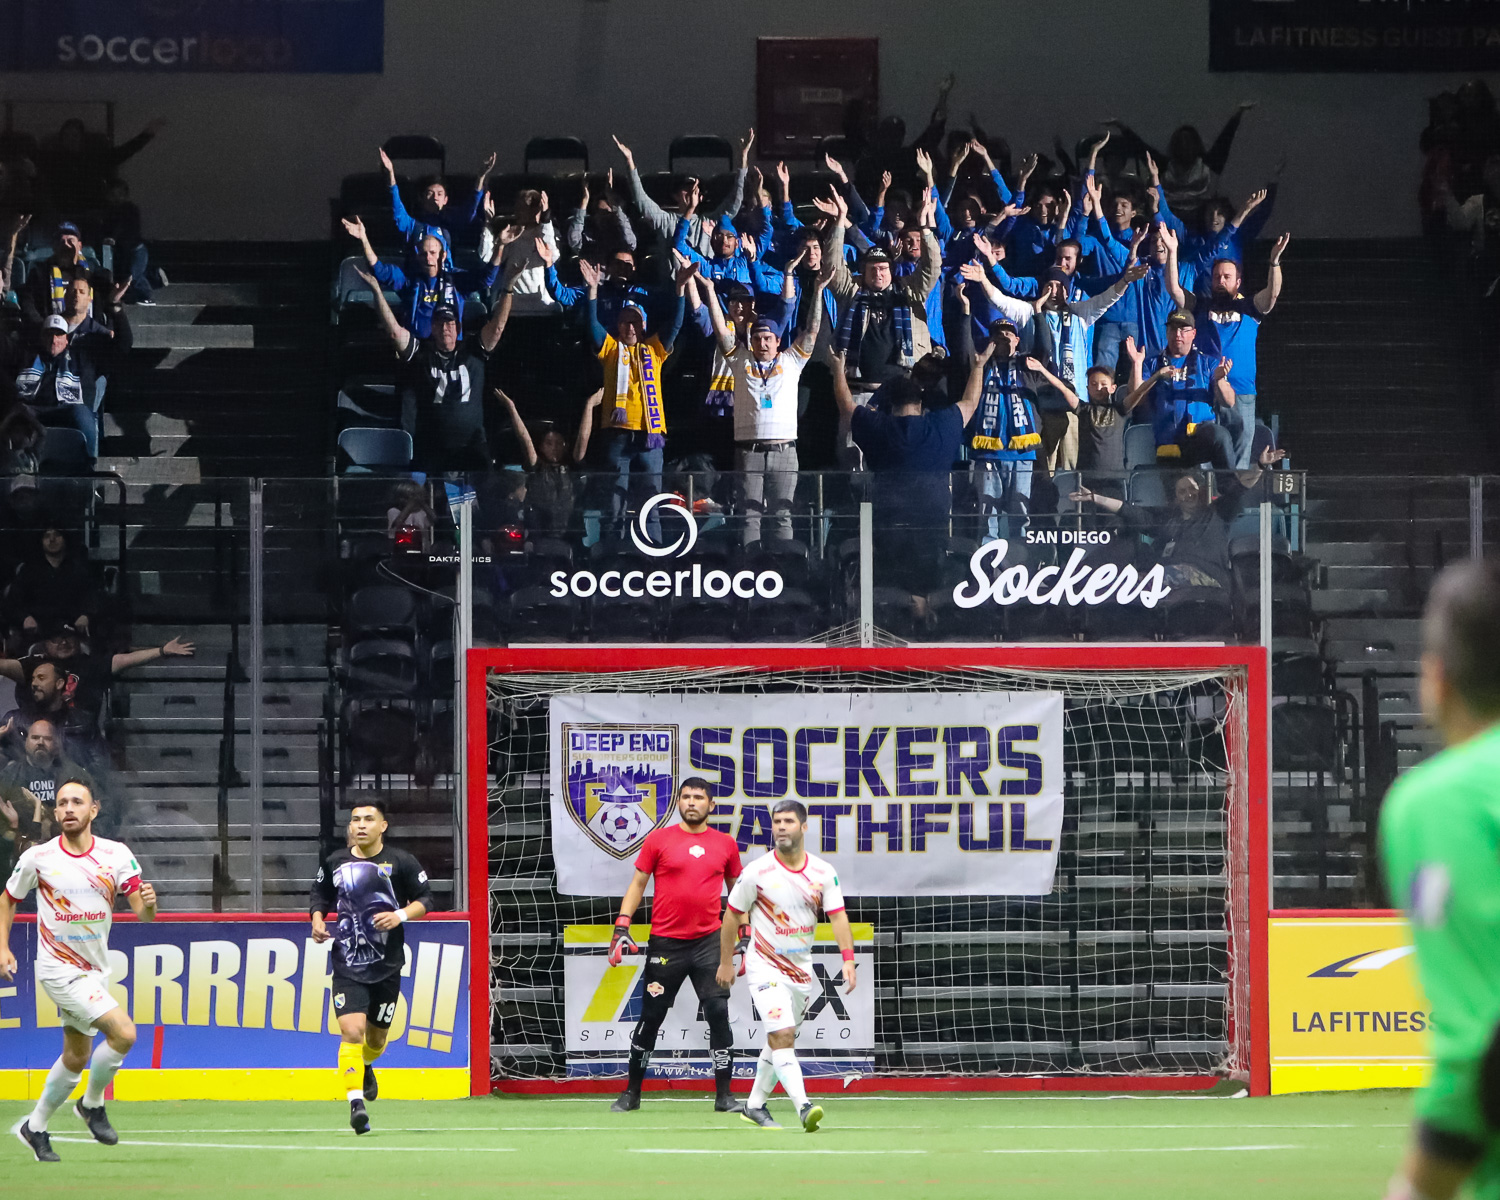 If you haven’t been to a Sockers game, change that. Here’s why.